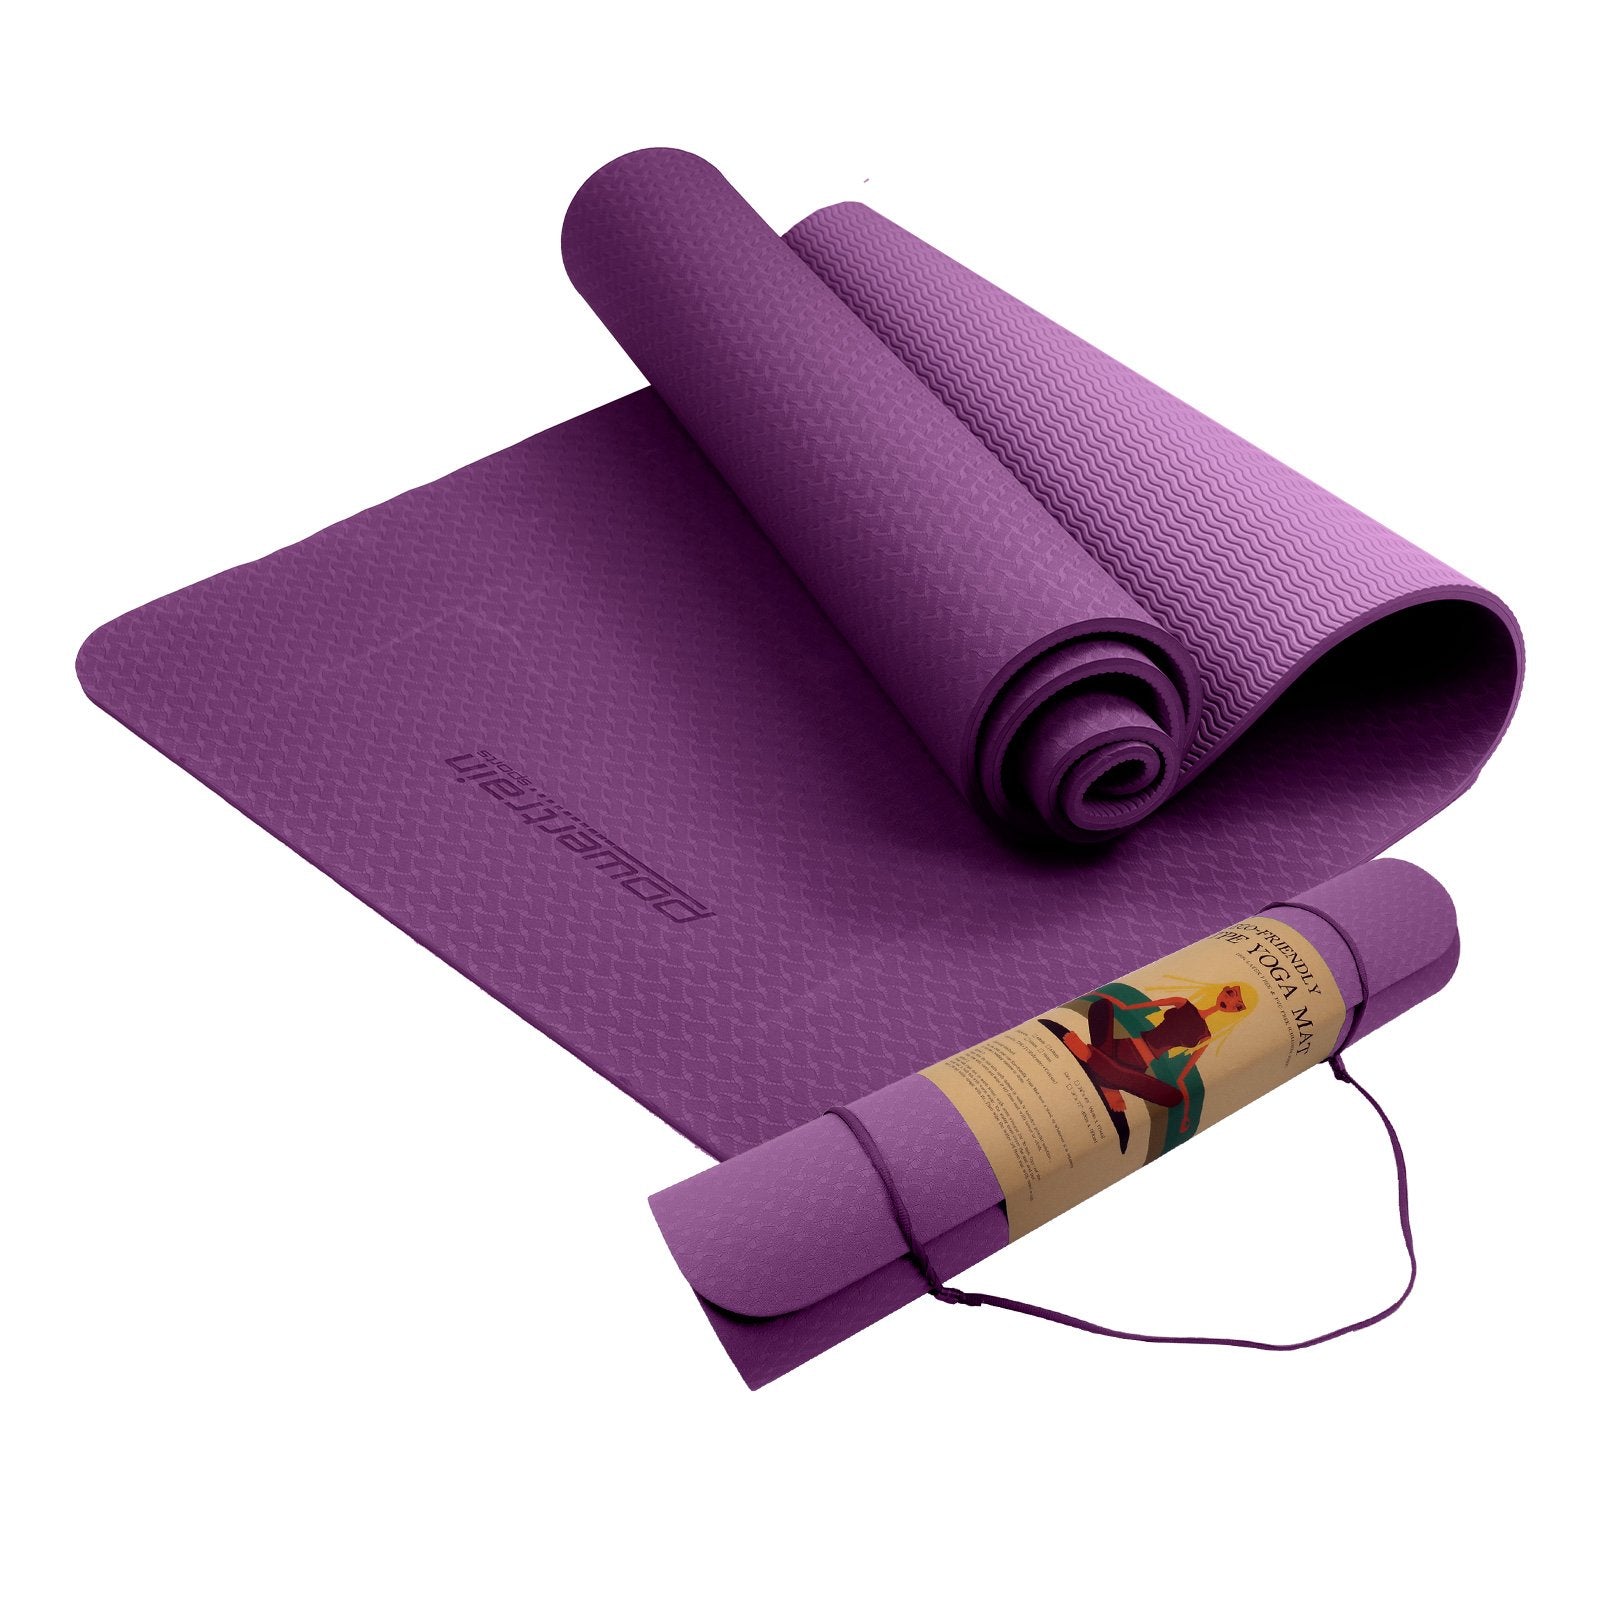 Eco-friendly Dual Layer 6mm Yoga Mat | Royal Purple | Non-slip Surface And Carry Strap For Ultimate Comfort And Portability